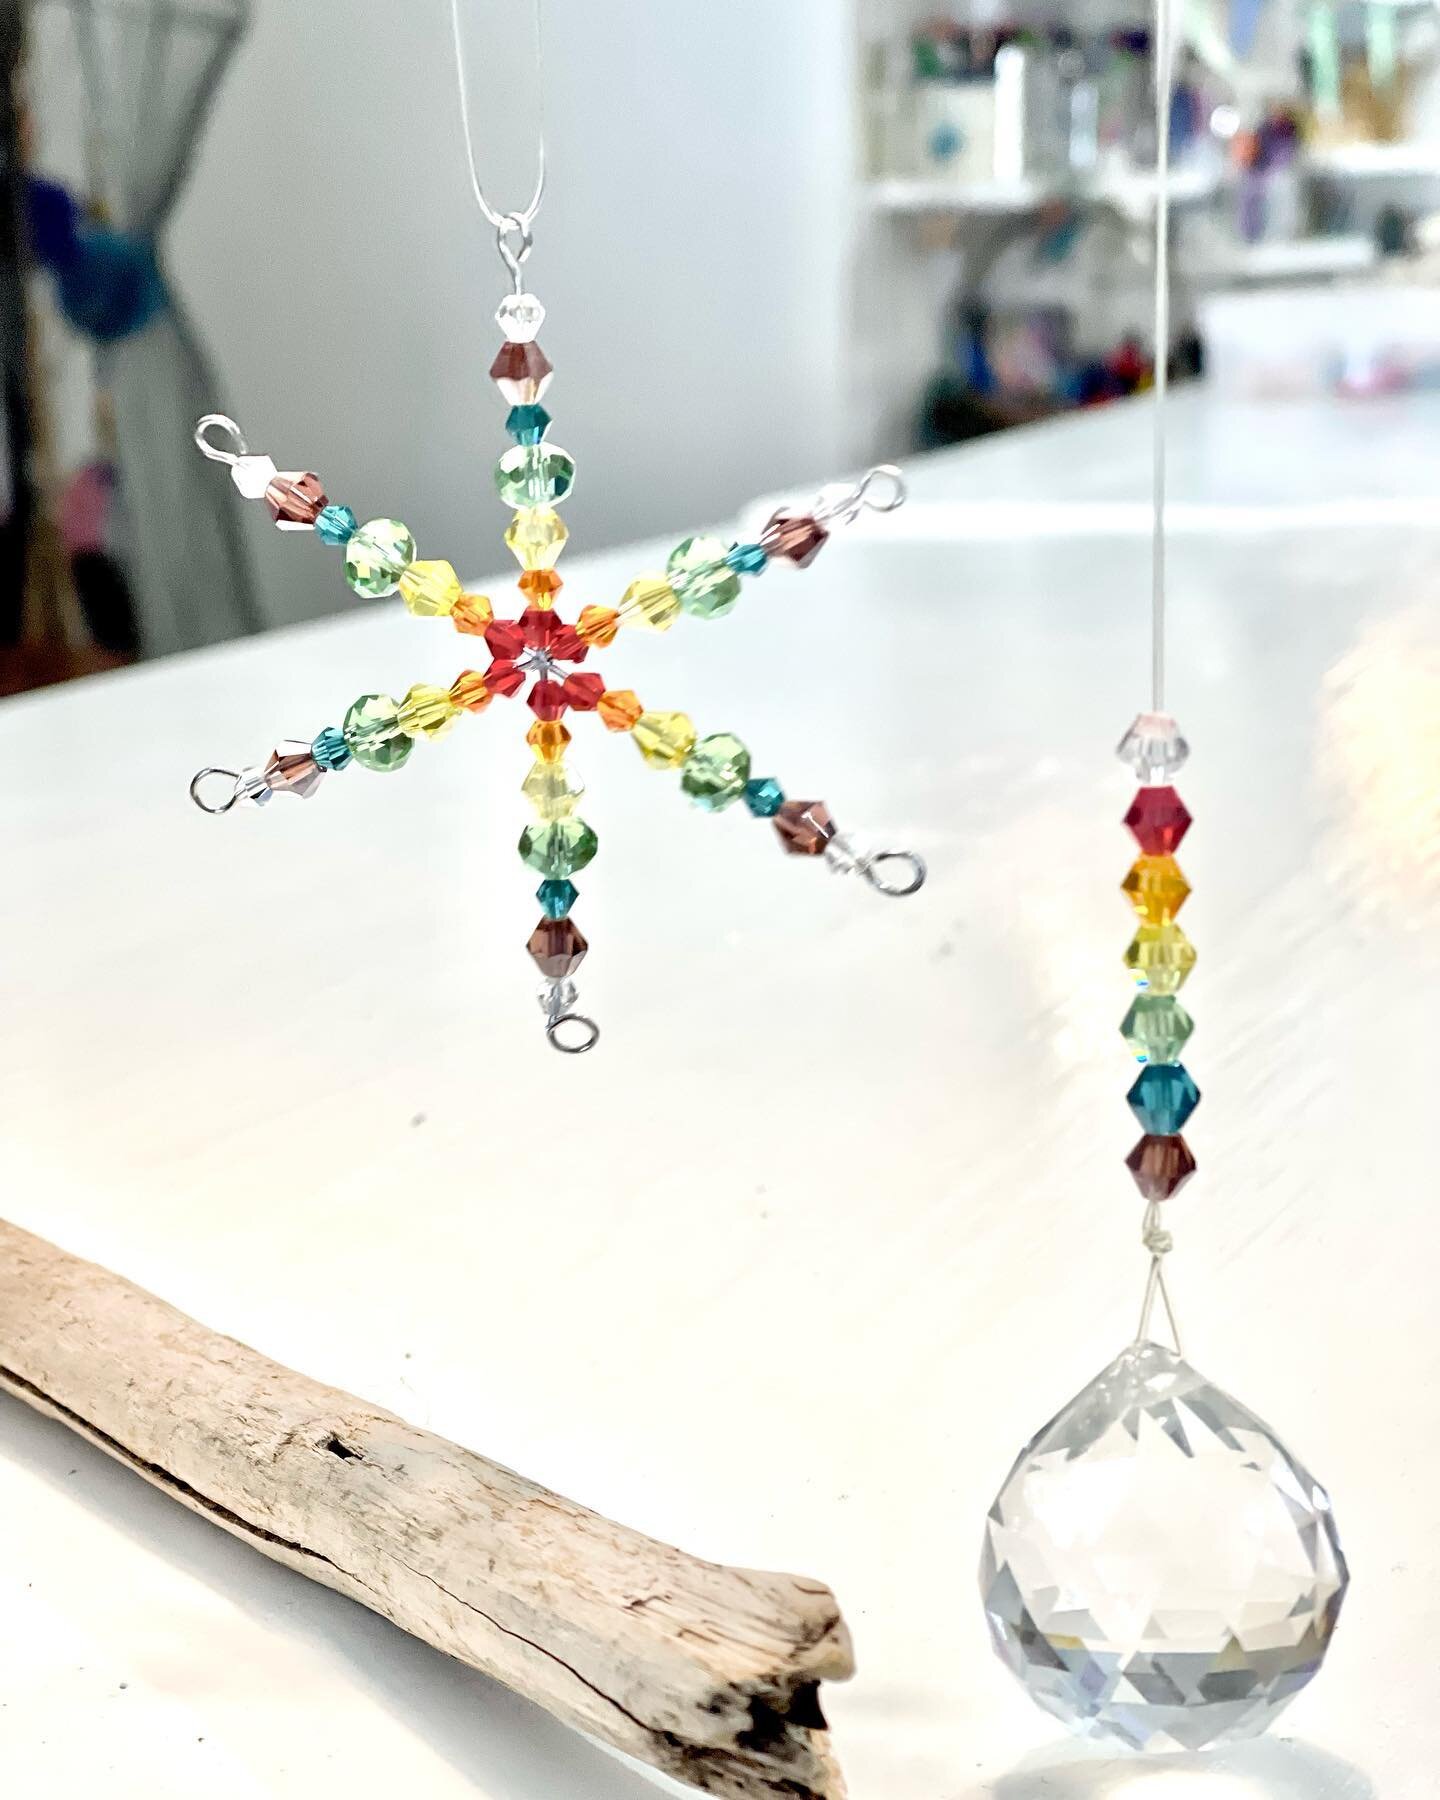 Join us tomorrow from 1-2 for this beautiful invitation to create! We will be making both of these Sun-catchers in our first pop up class of 2022. Link to register in our bio&hellip; class best suited for ages 8 - adult but all ages welcome. More cla